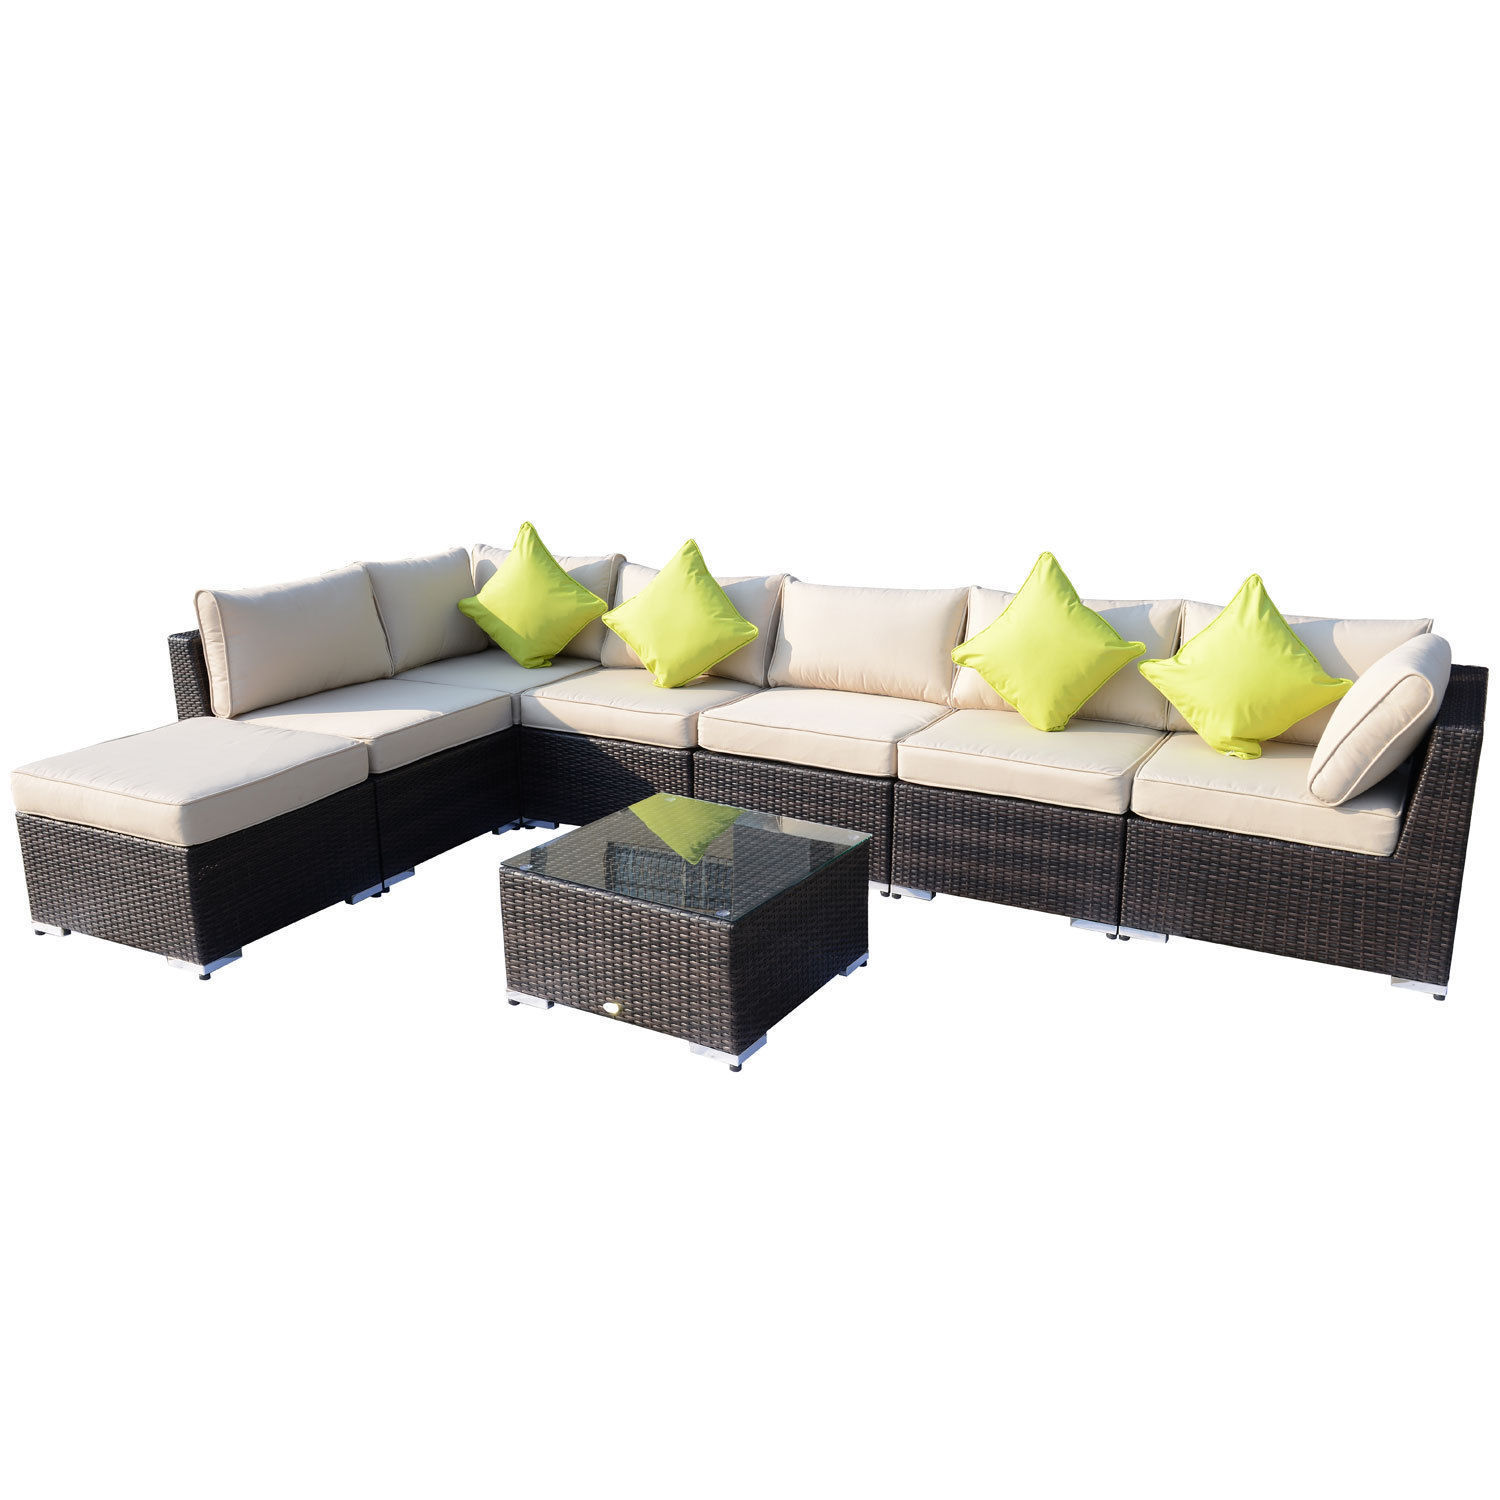 Outsunny 8 Pieces PE Rattan Corner Sofa Set, Outdoor Garden Aluminium Furniture Set, Patio Wicker Sofa Seater w/ 10cm Cushion, Washable Cushion Cover & Tempered Glass Table, Mixed Brown